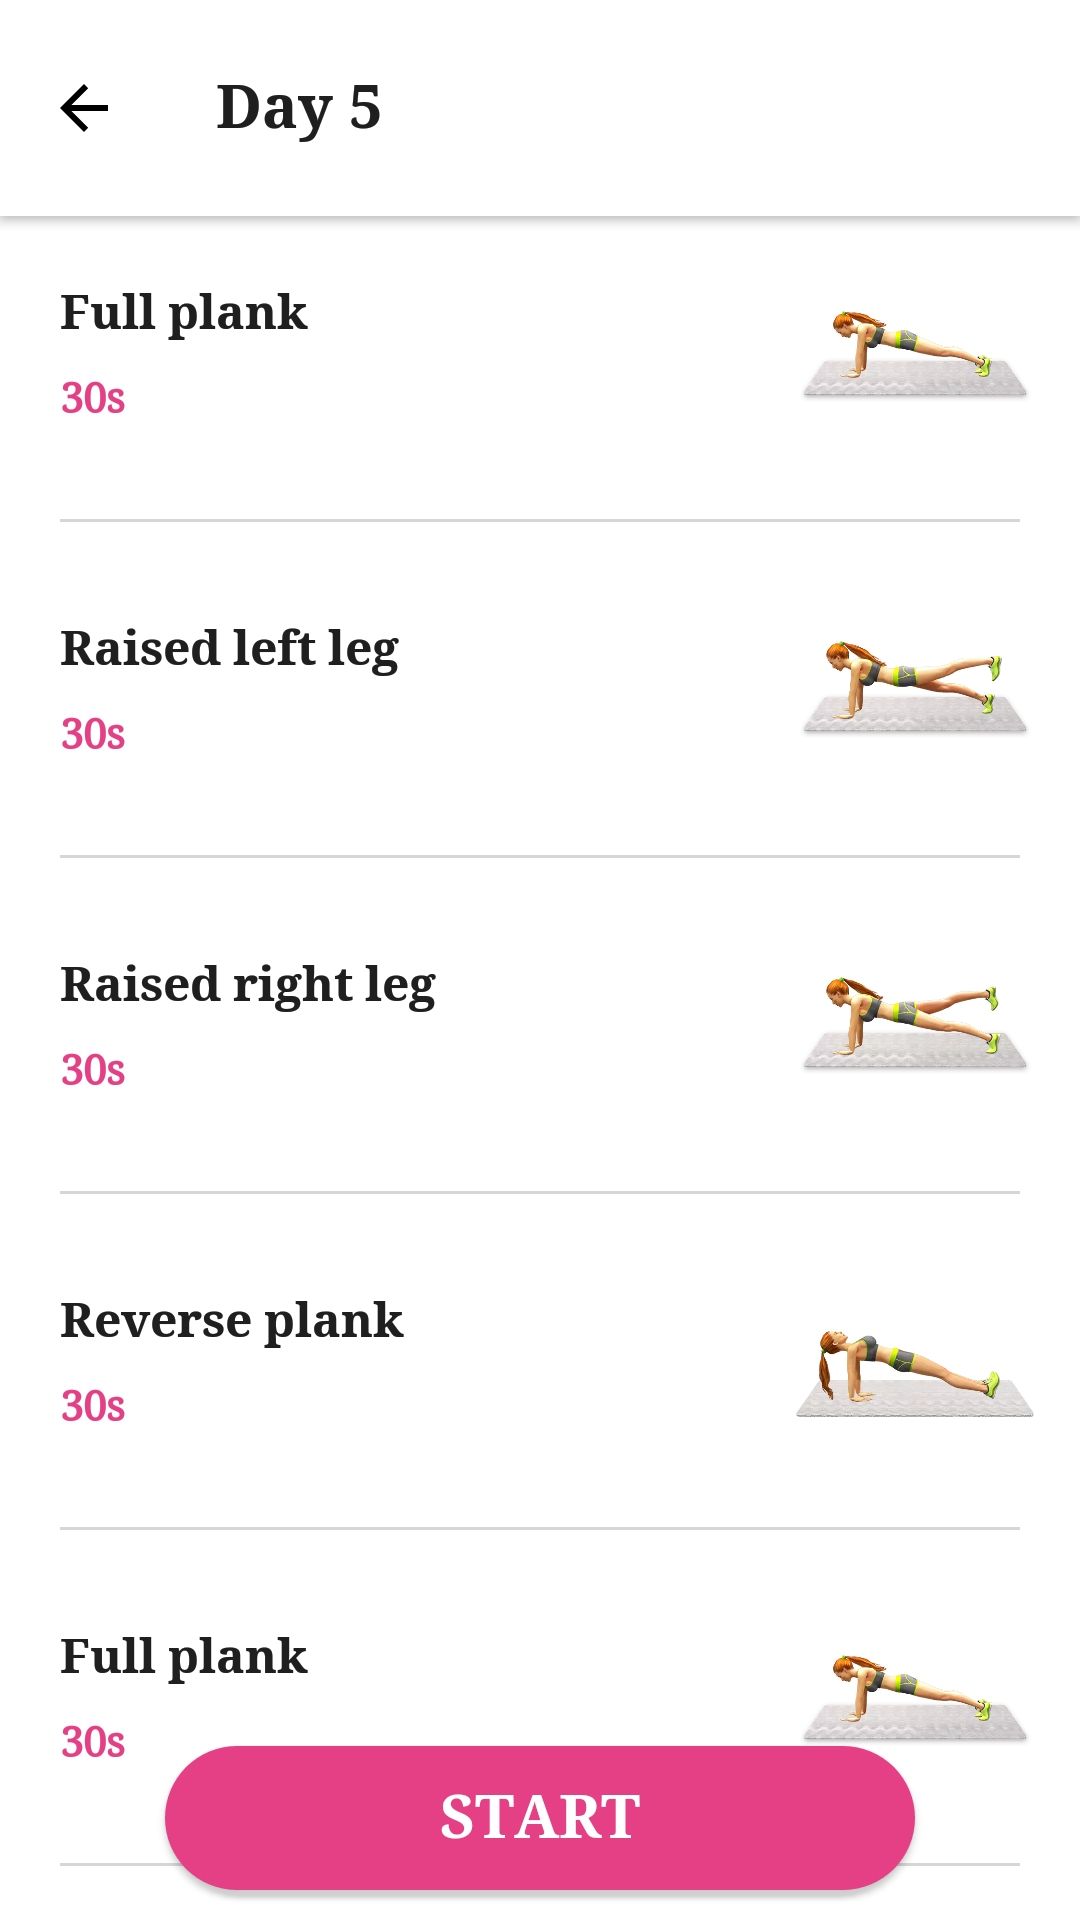 Plank Workout mobile exercise app day 5